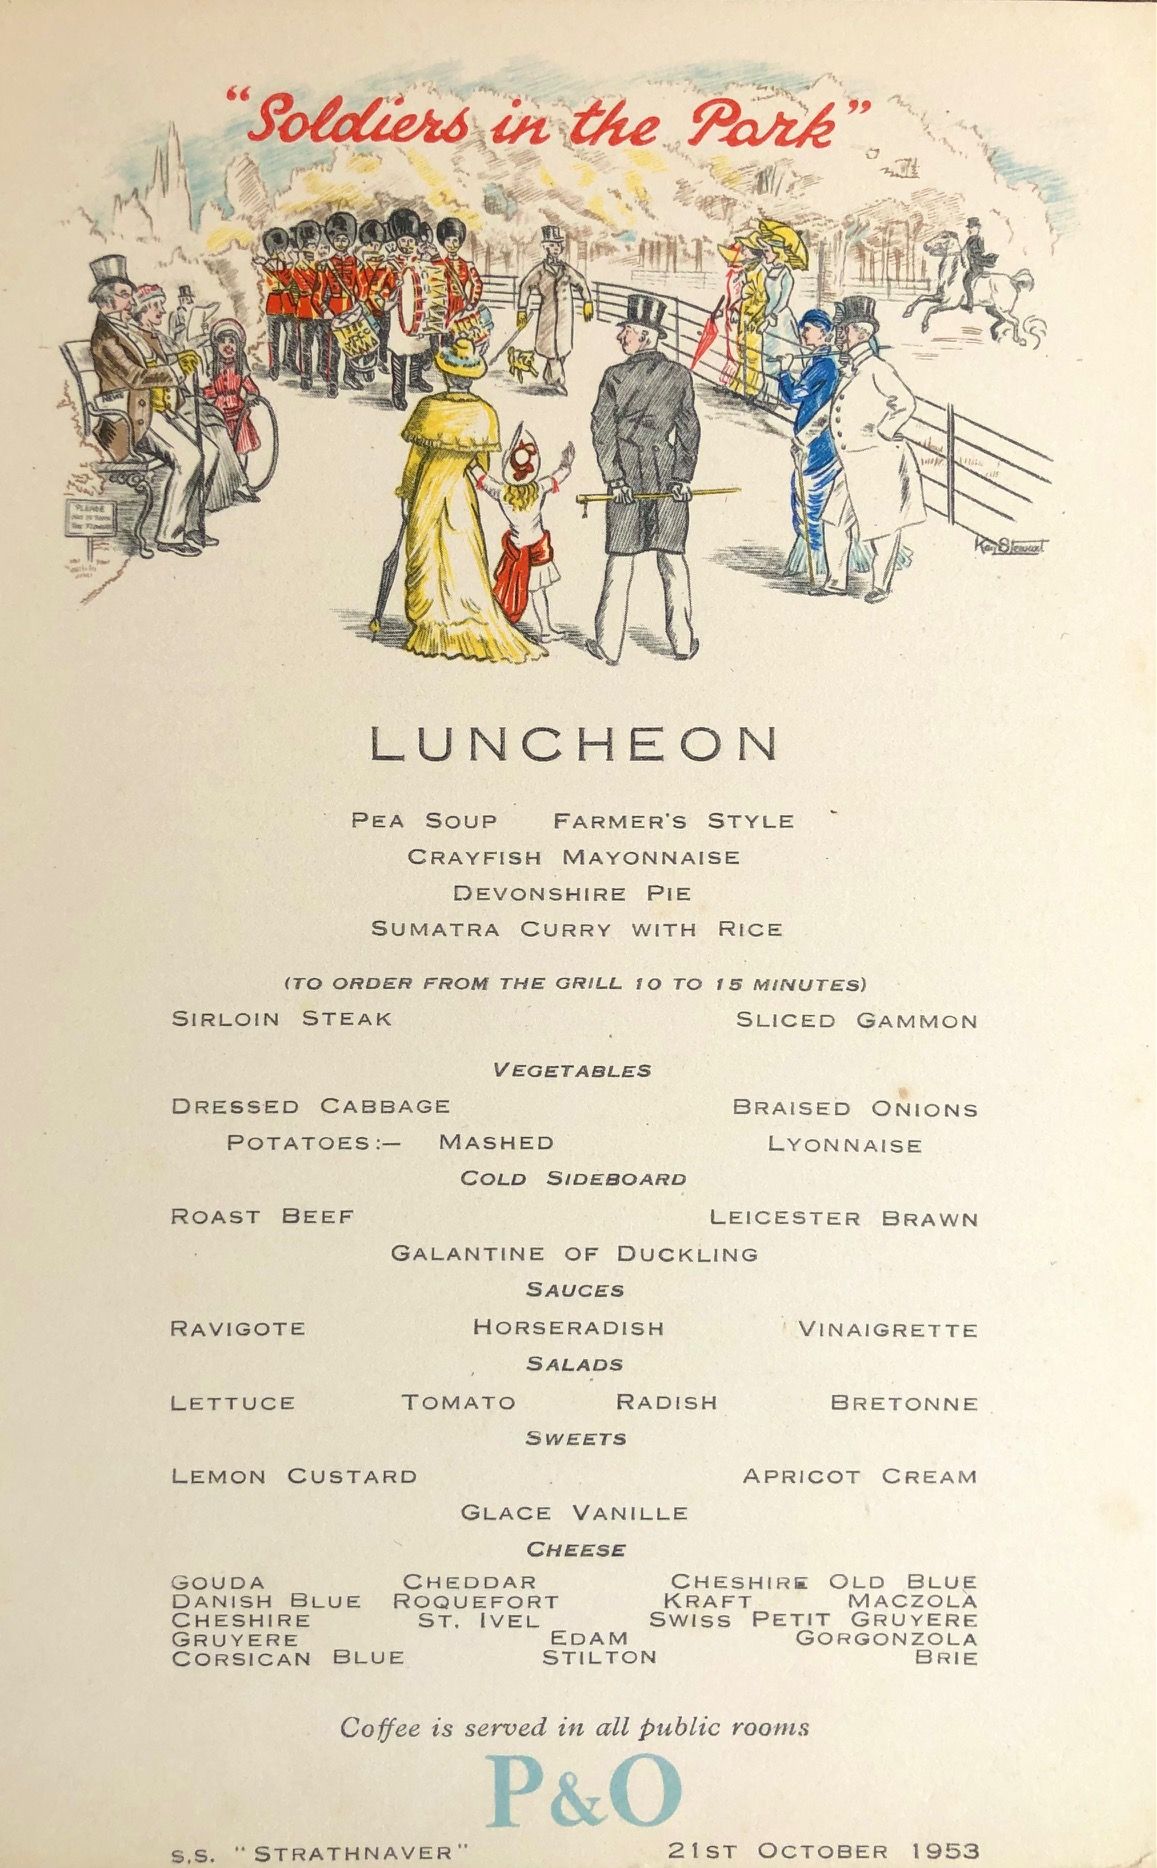 *NEW* P & O Lines. S.S. "Strathnaver" Luncheon Menu - Soldiers in the Park